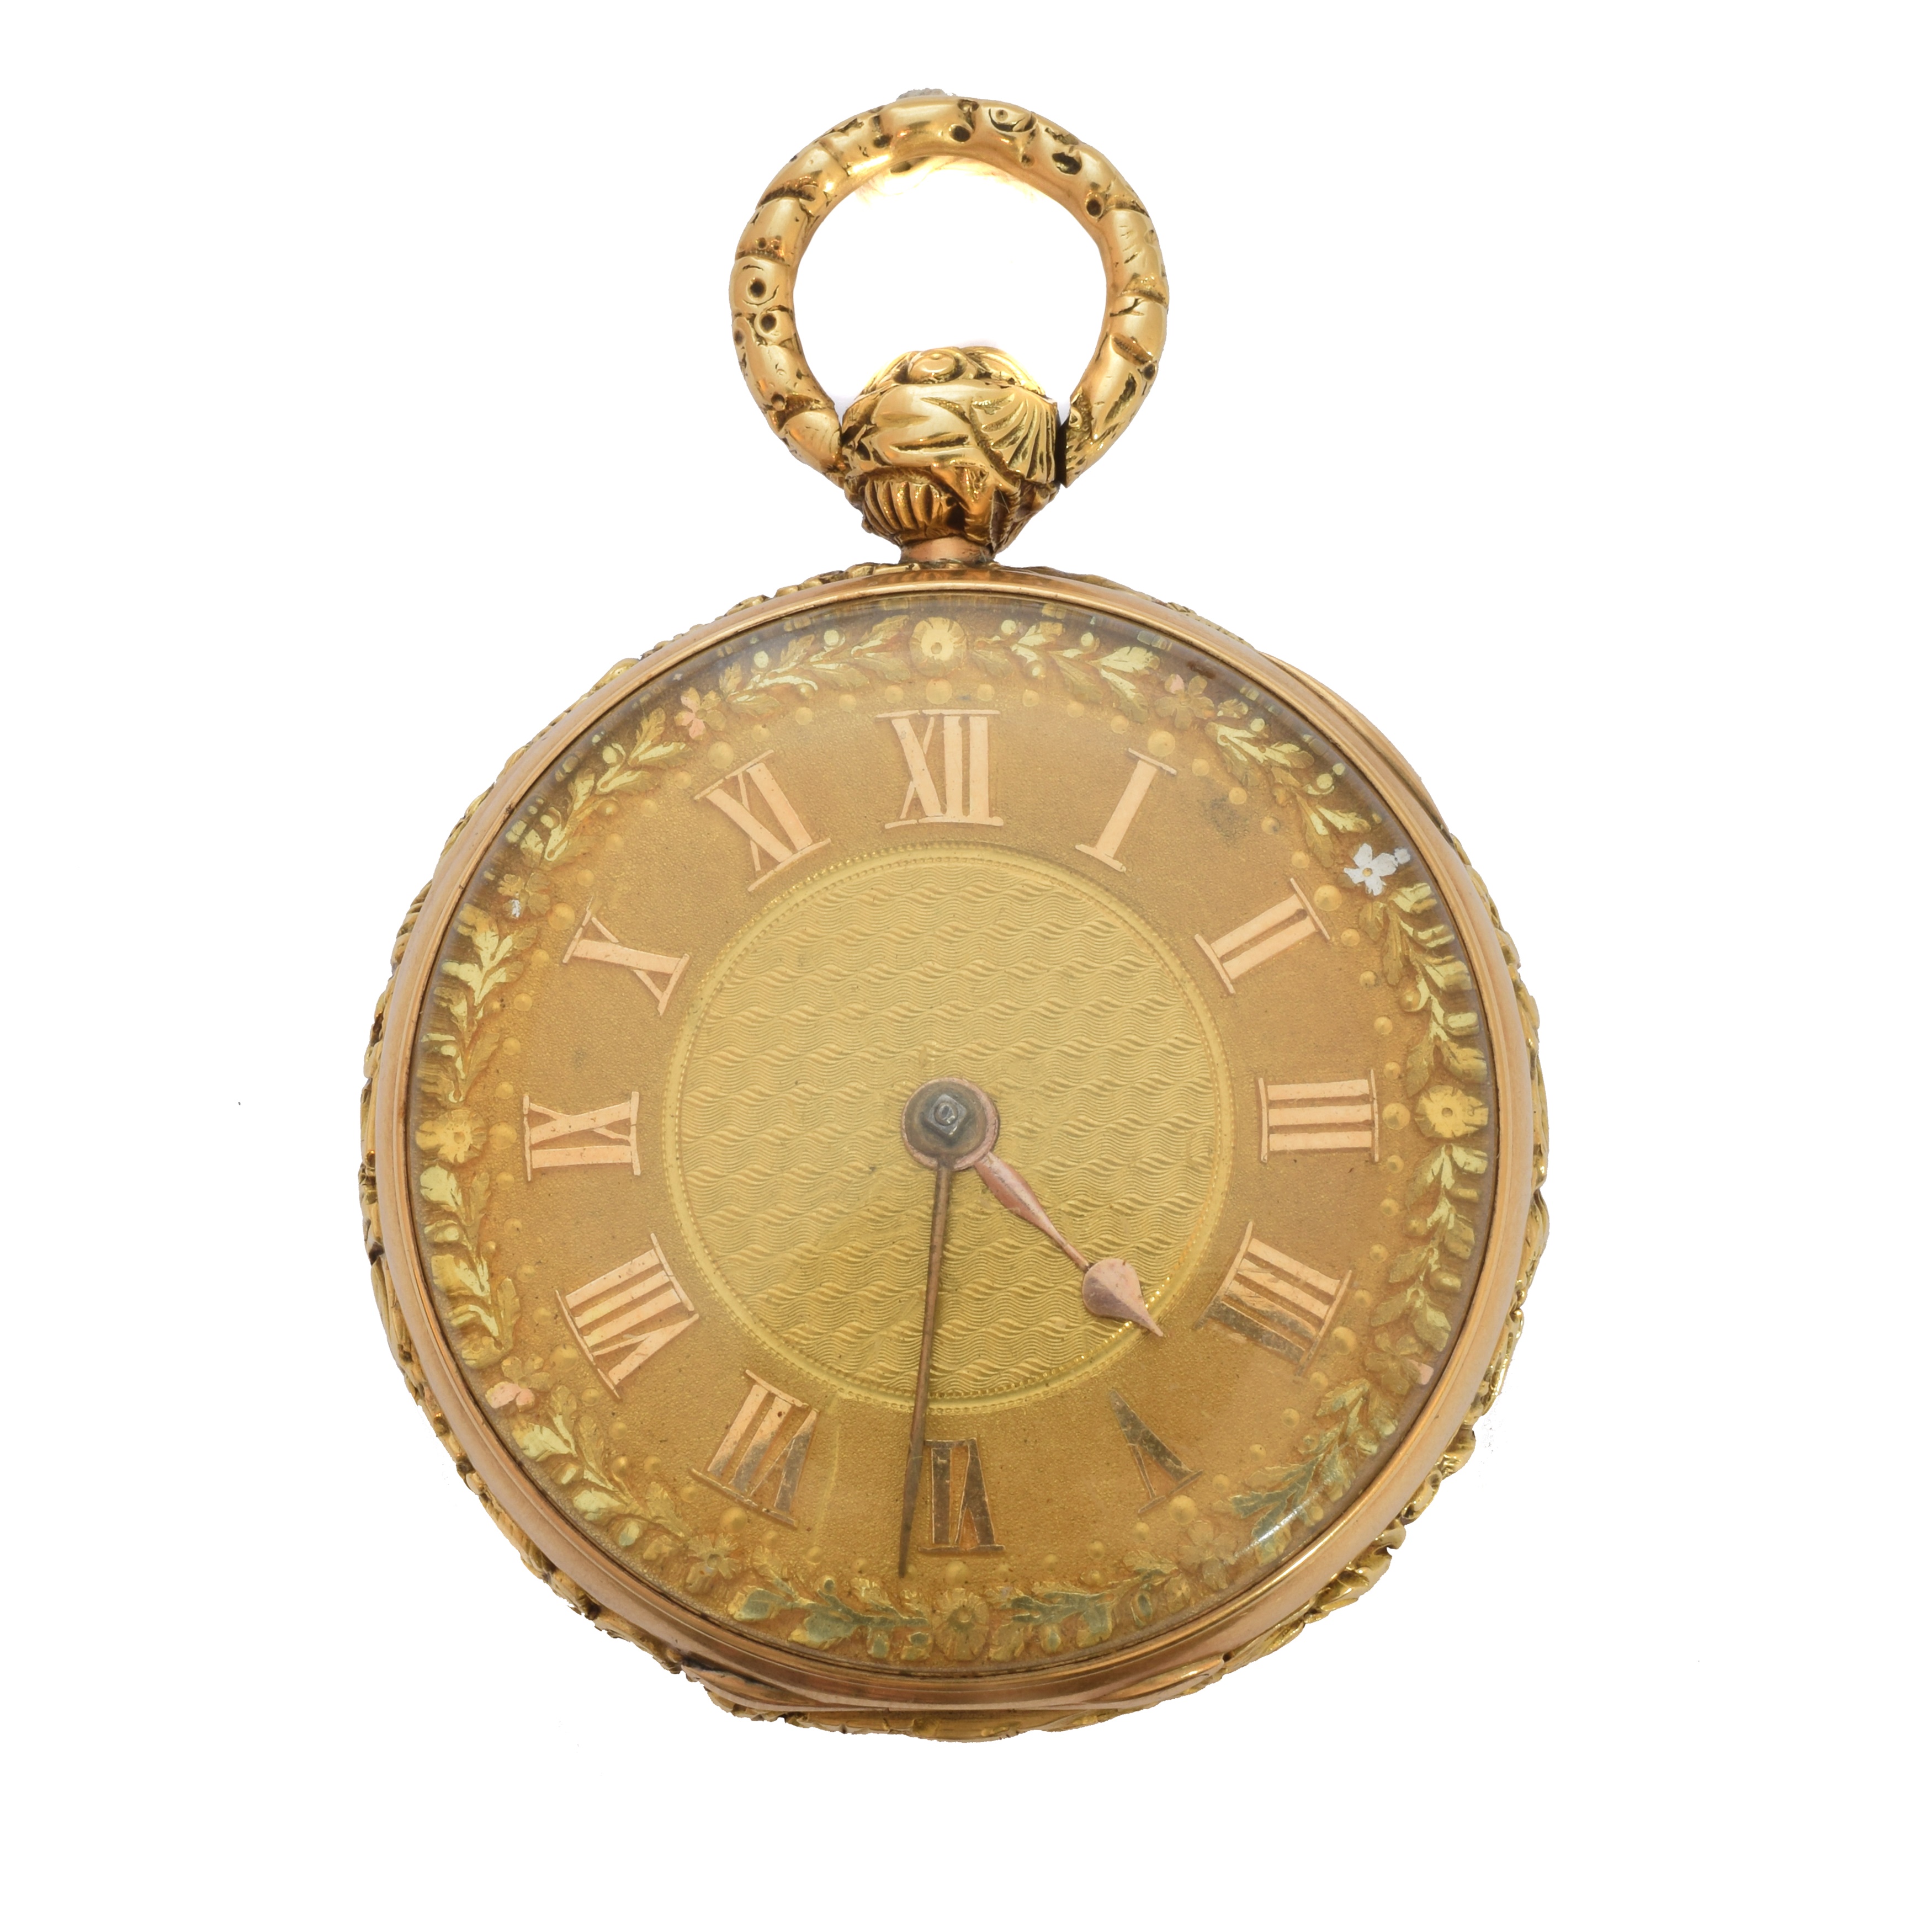 A Victorian 18ct gold open face pocket watch by Litherland Davies & Co., the circular gold tone dial with foliate detailing and Roman numeral hour markers, key wound movement with foliate watch cock, rose cut diamond endstone, signed and numbered Litherland Davies & Co., Liverpool, No.9127, within a case bearing hallmarks for THJH, Chester, 1884, featuring repoussé decoration of cupid to the back and foliate detailing to the surround and bow, case diameter 48mm, gross weight 110.6g.